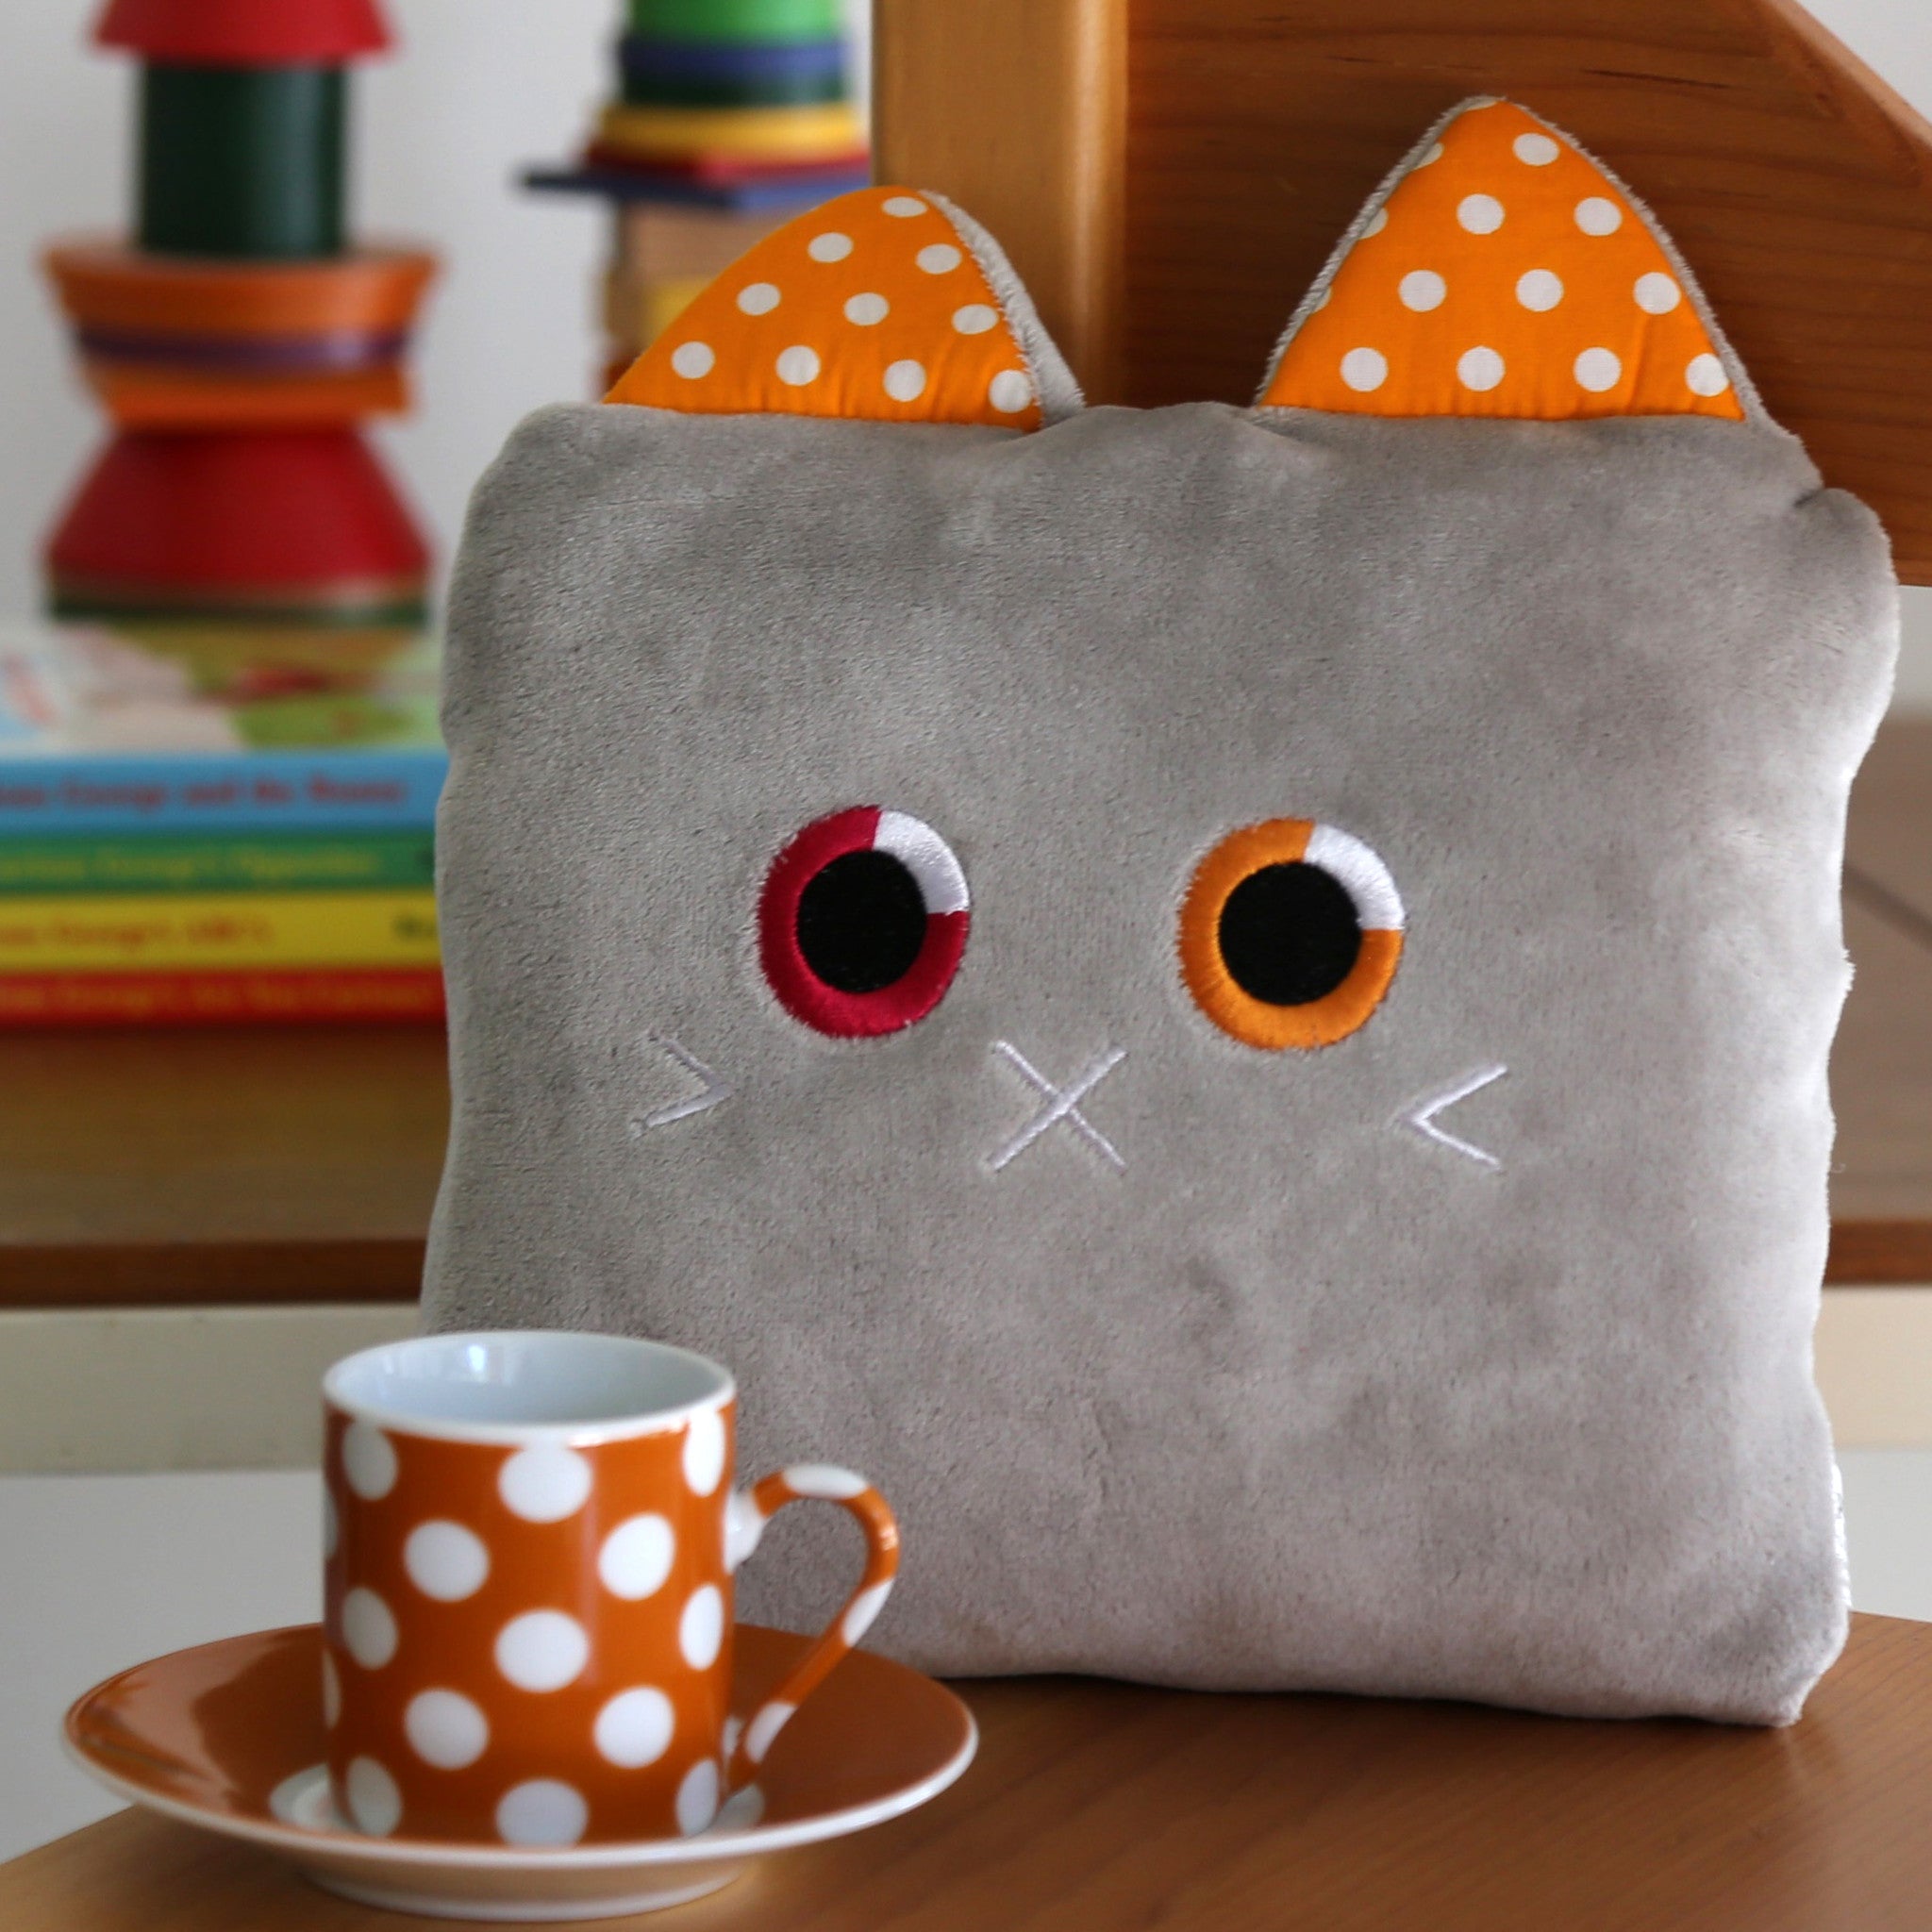 Poketti Kitty Cat Plush Pillow with a Pocket - A perfect gift